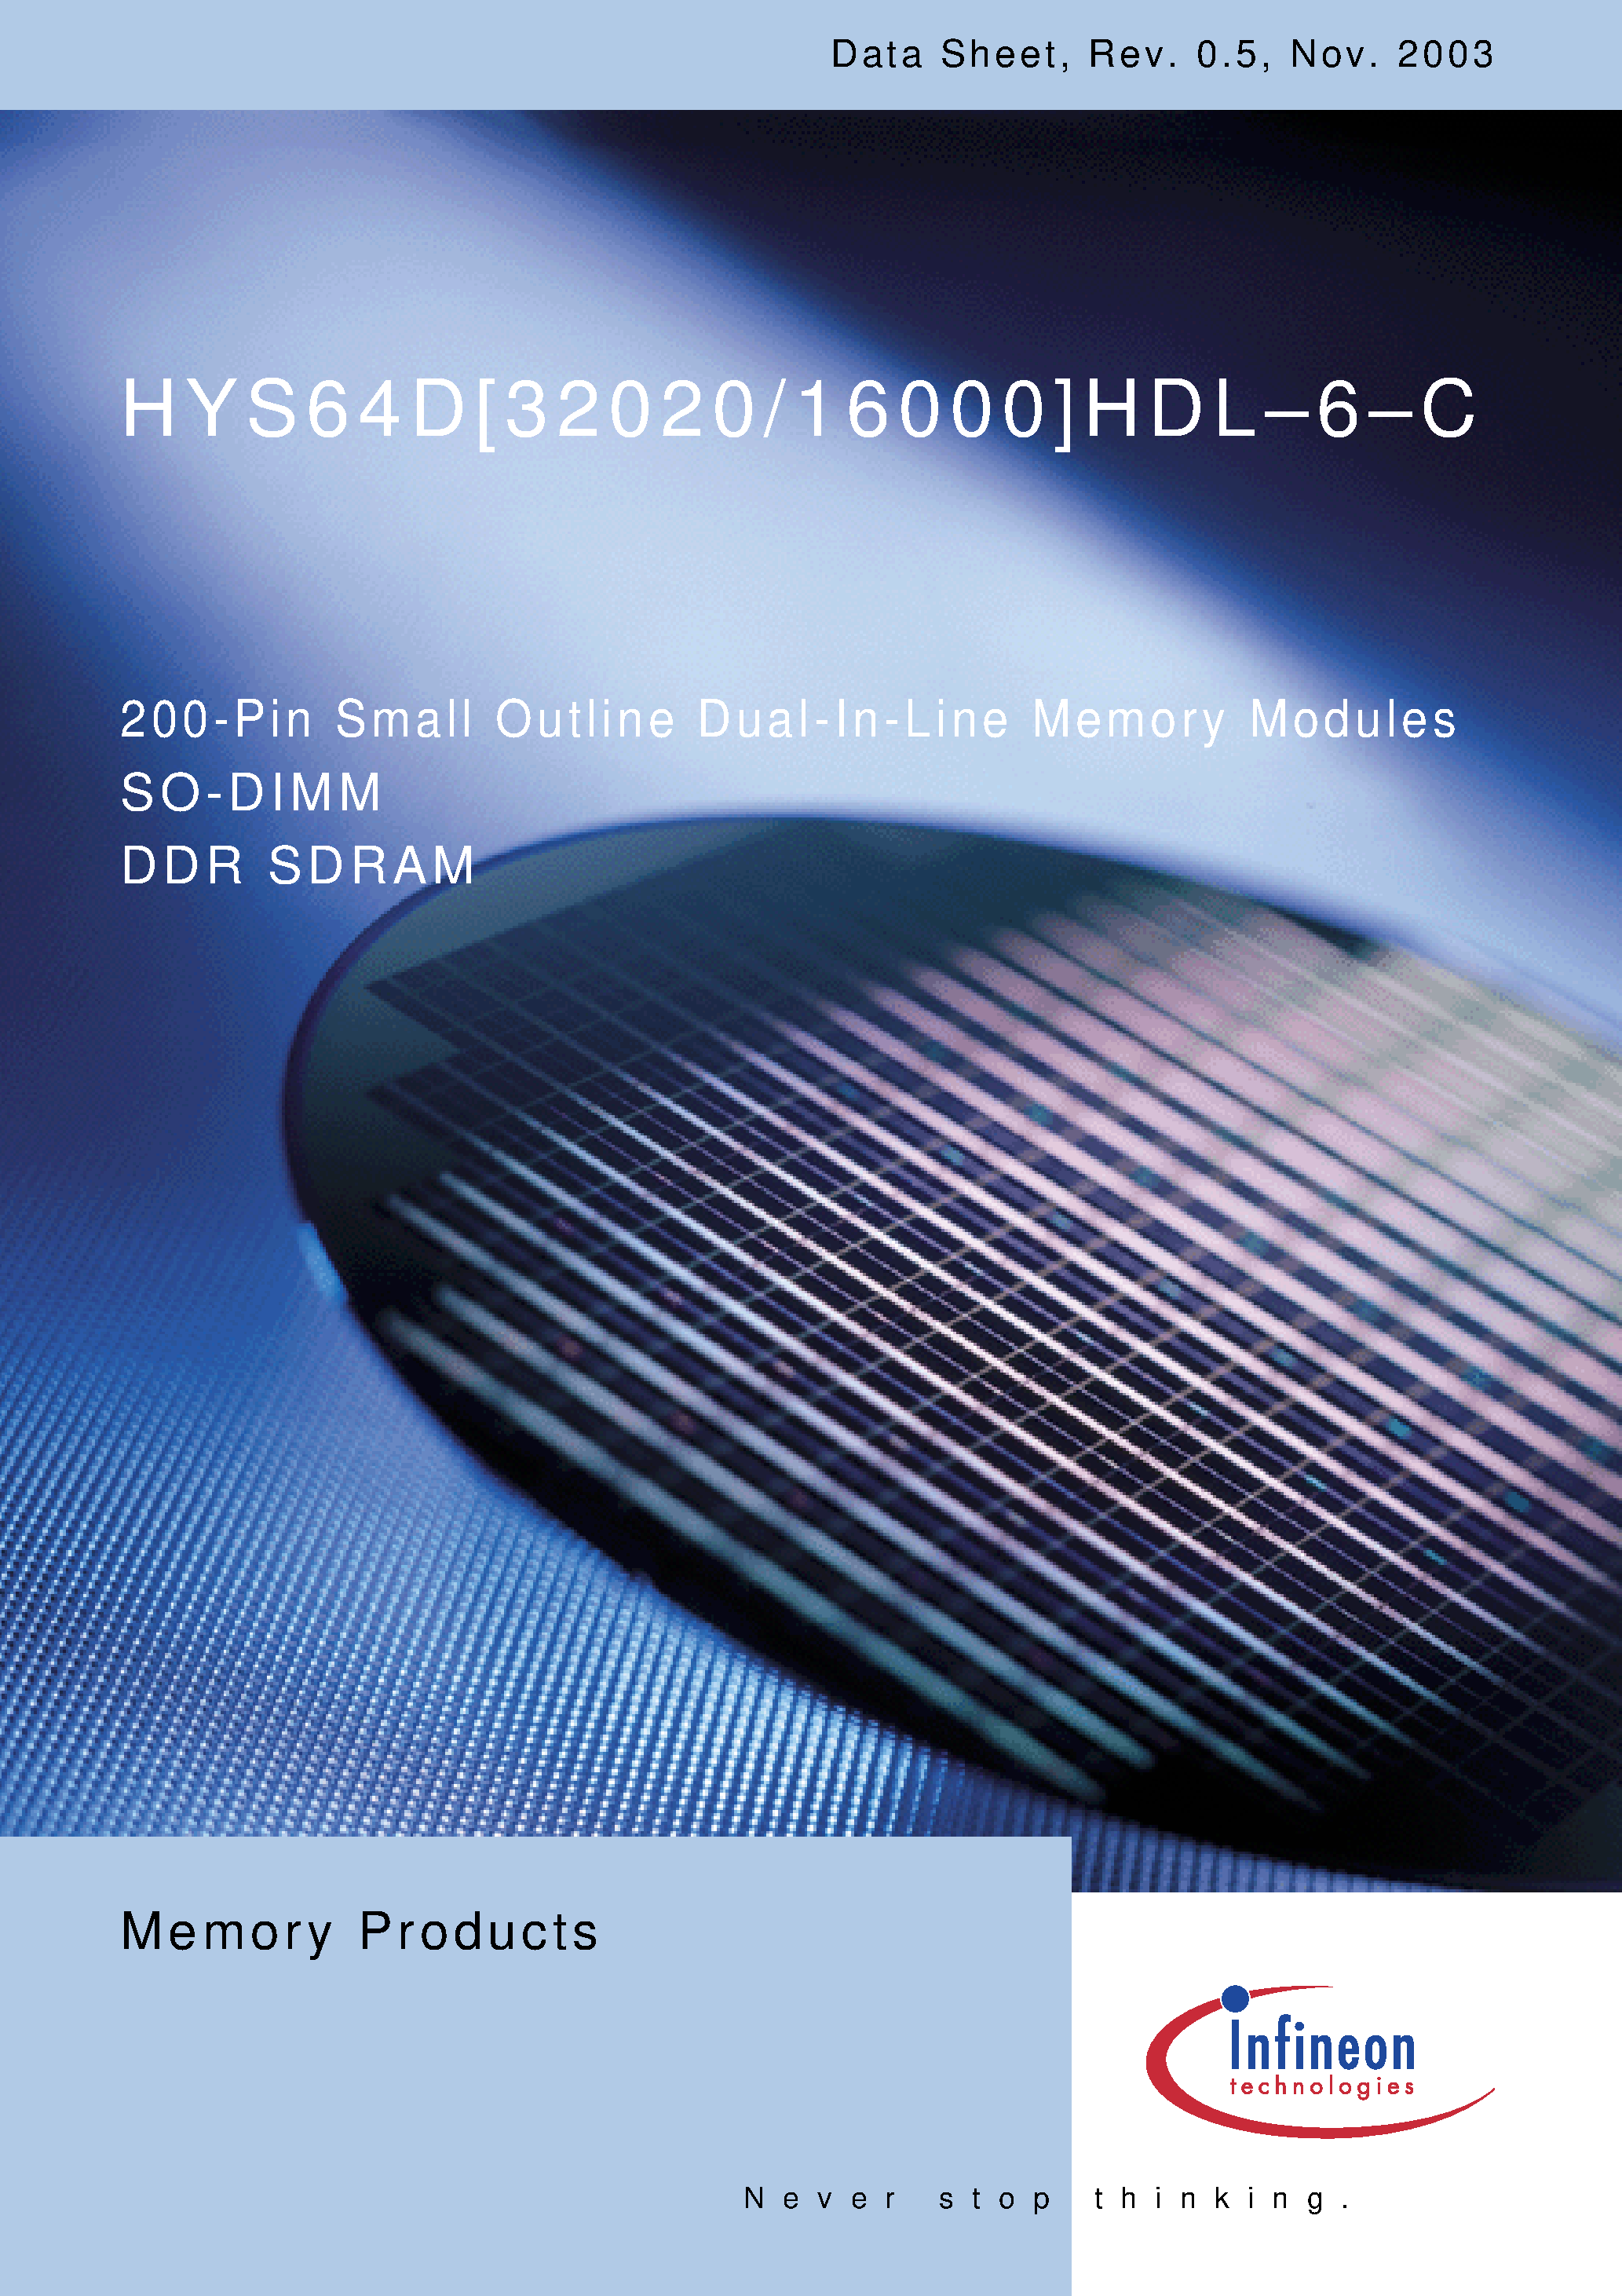 Даташит HYS64D16000HDL-6-C - 200-Pin Small Outline Dual-In-Line Memory Modules страница 1